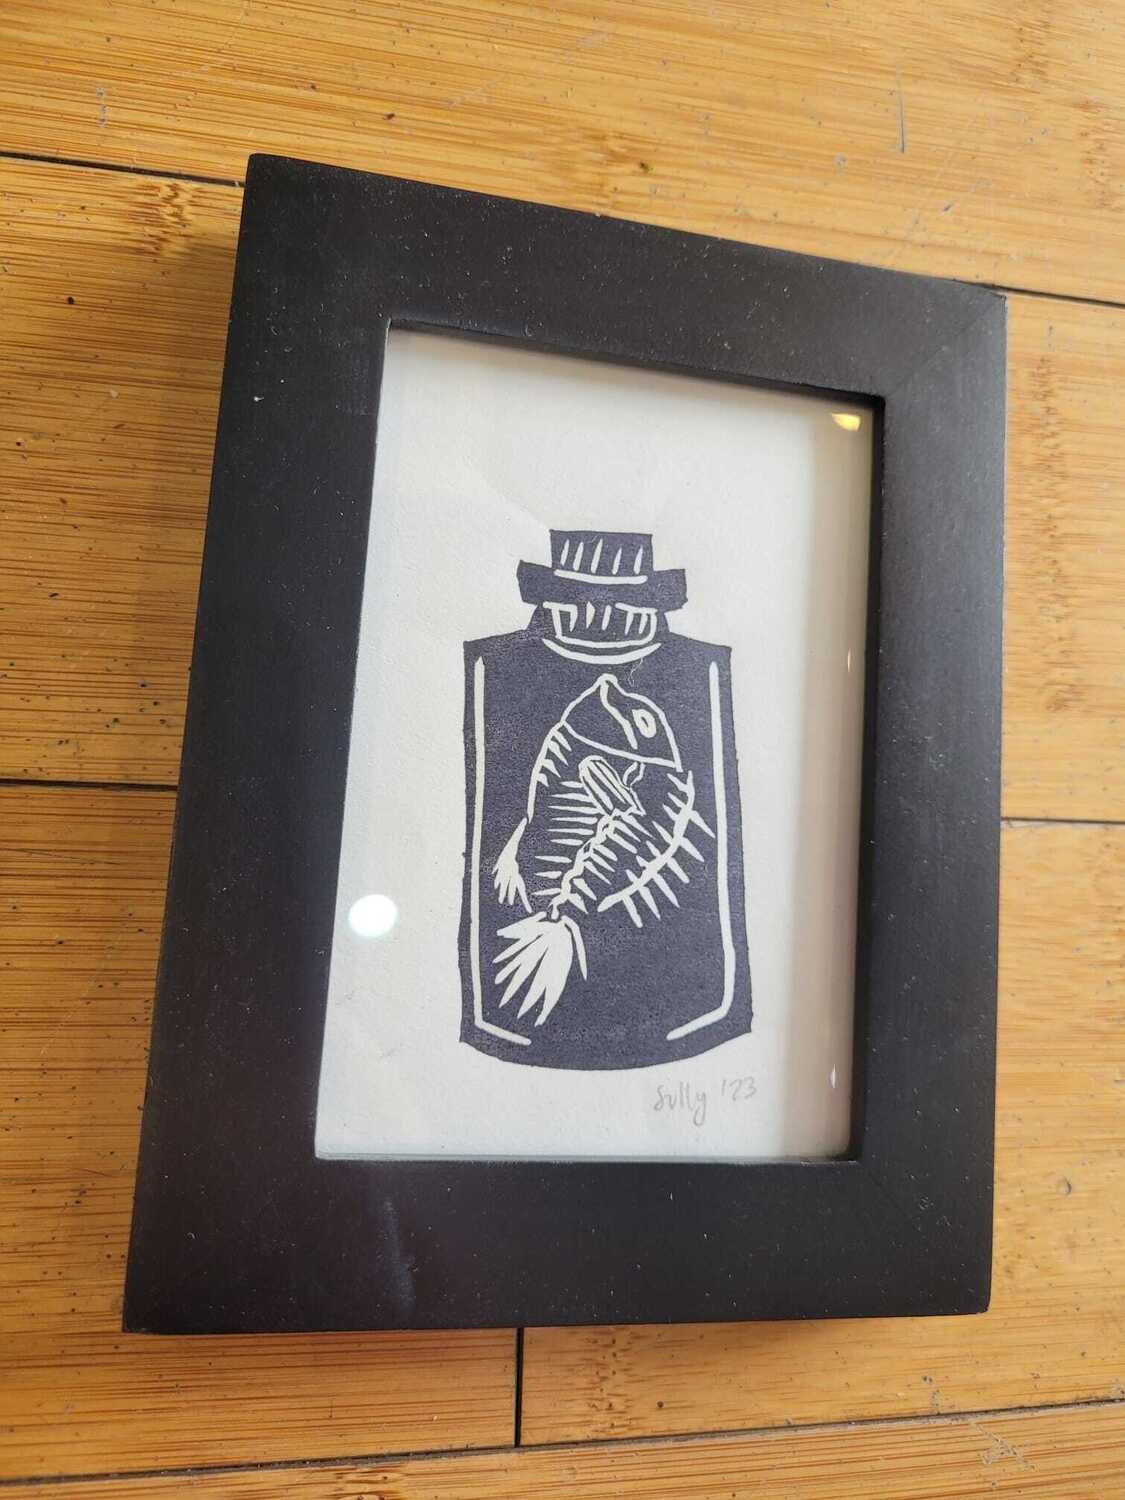 Dyed Dead (Diaphonized Fish in Jar) - Framed Block Print by Sully Kaiju